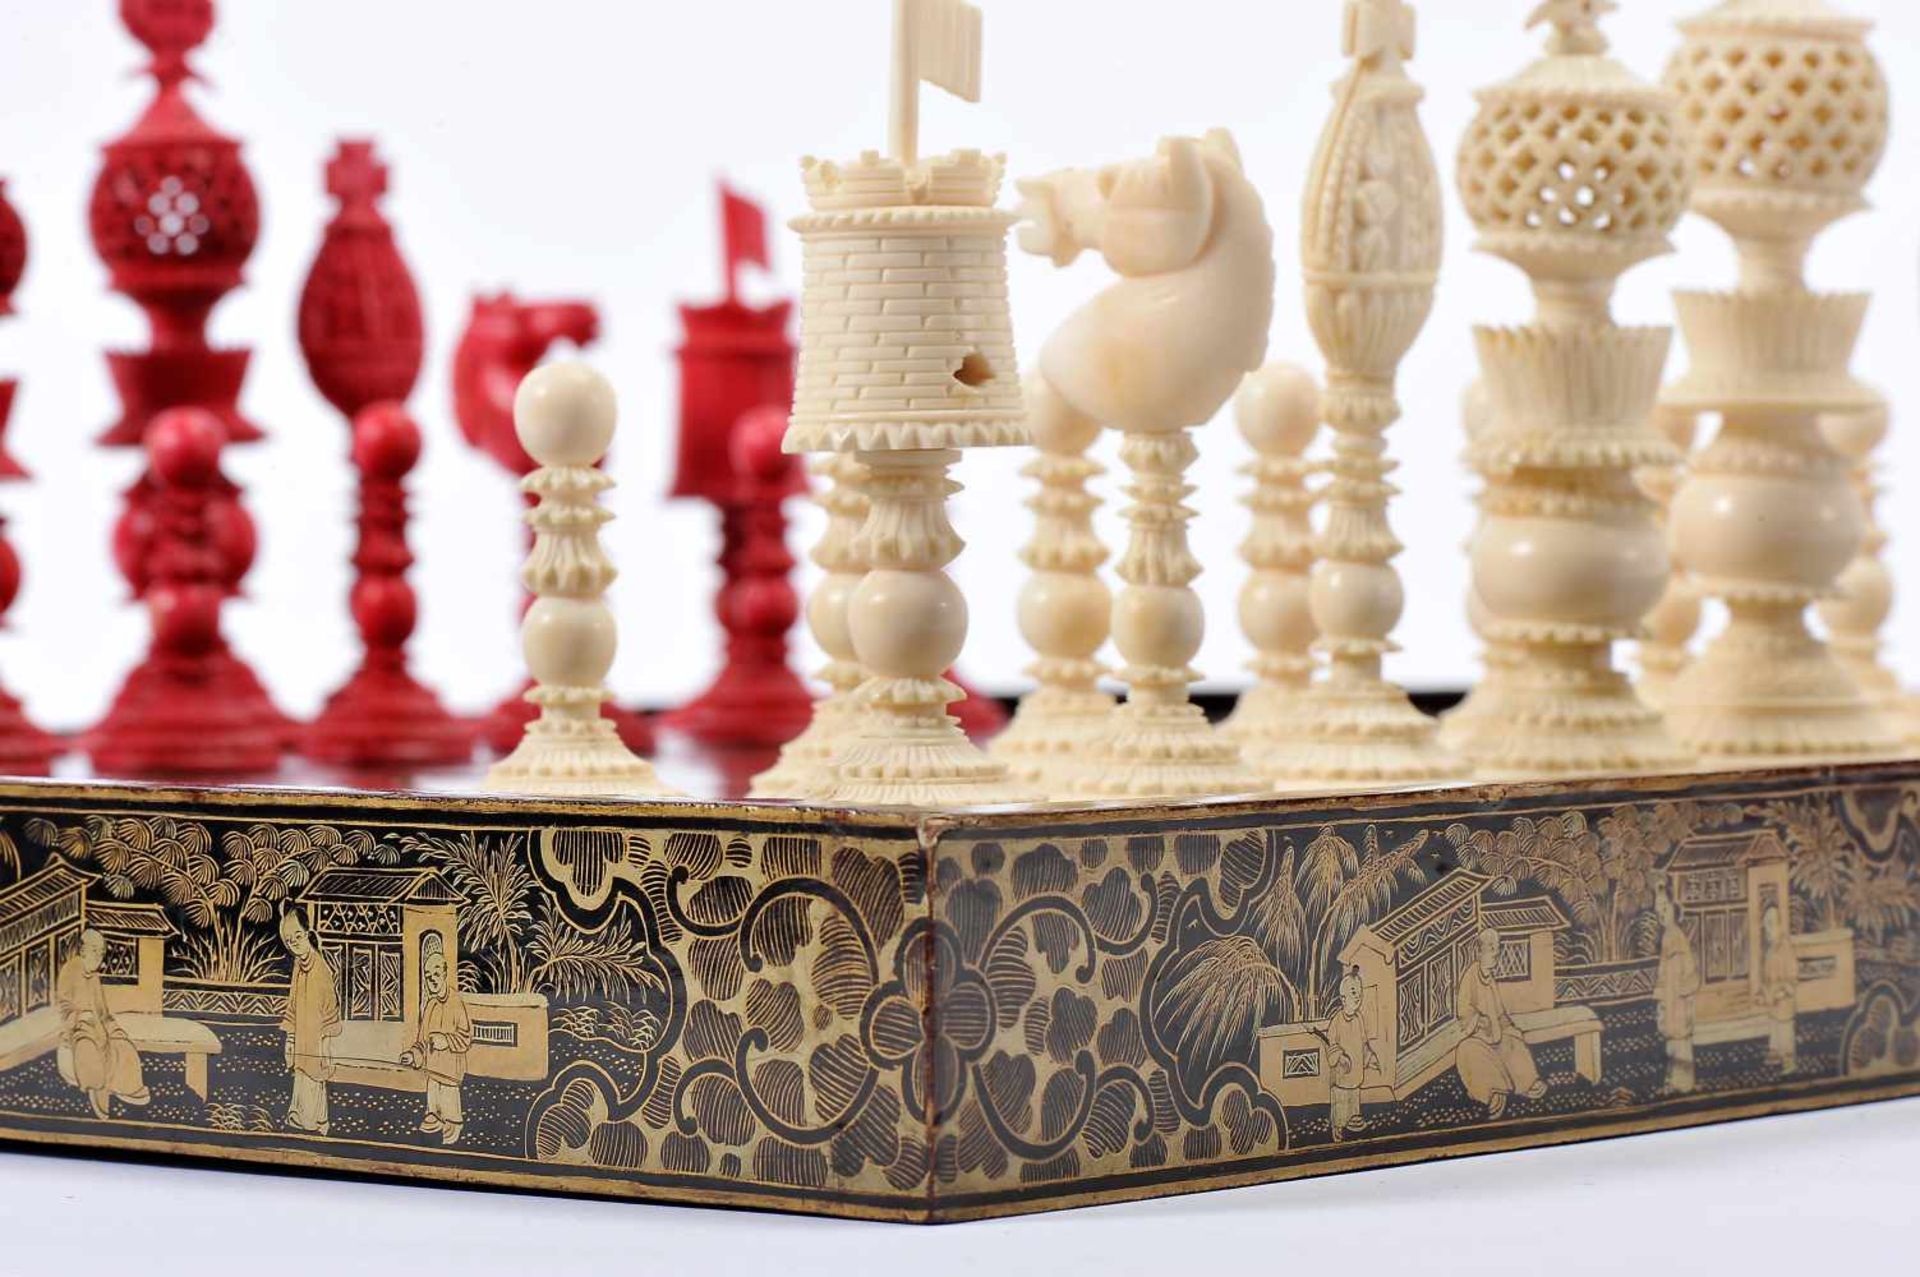 Chess pieces and case / board - Image 5 of 6